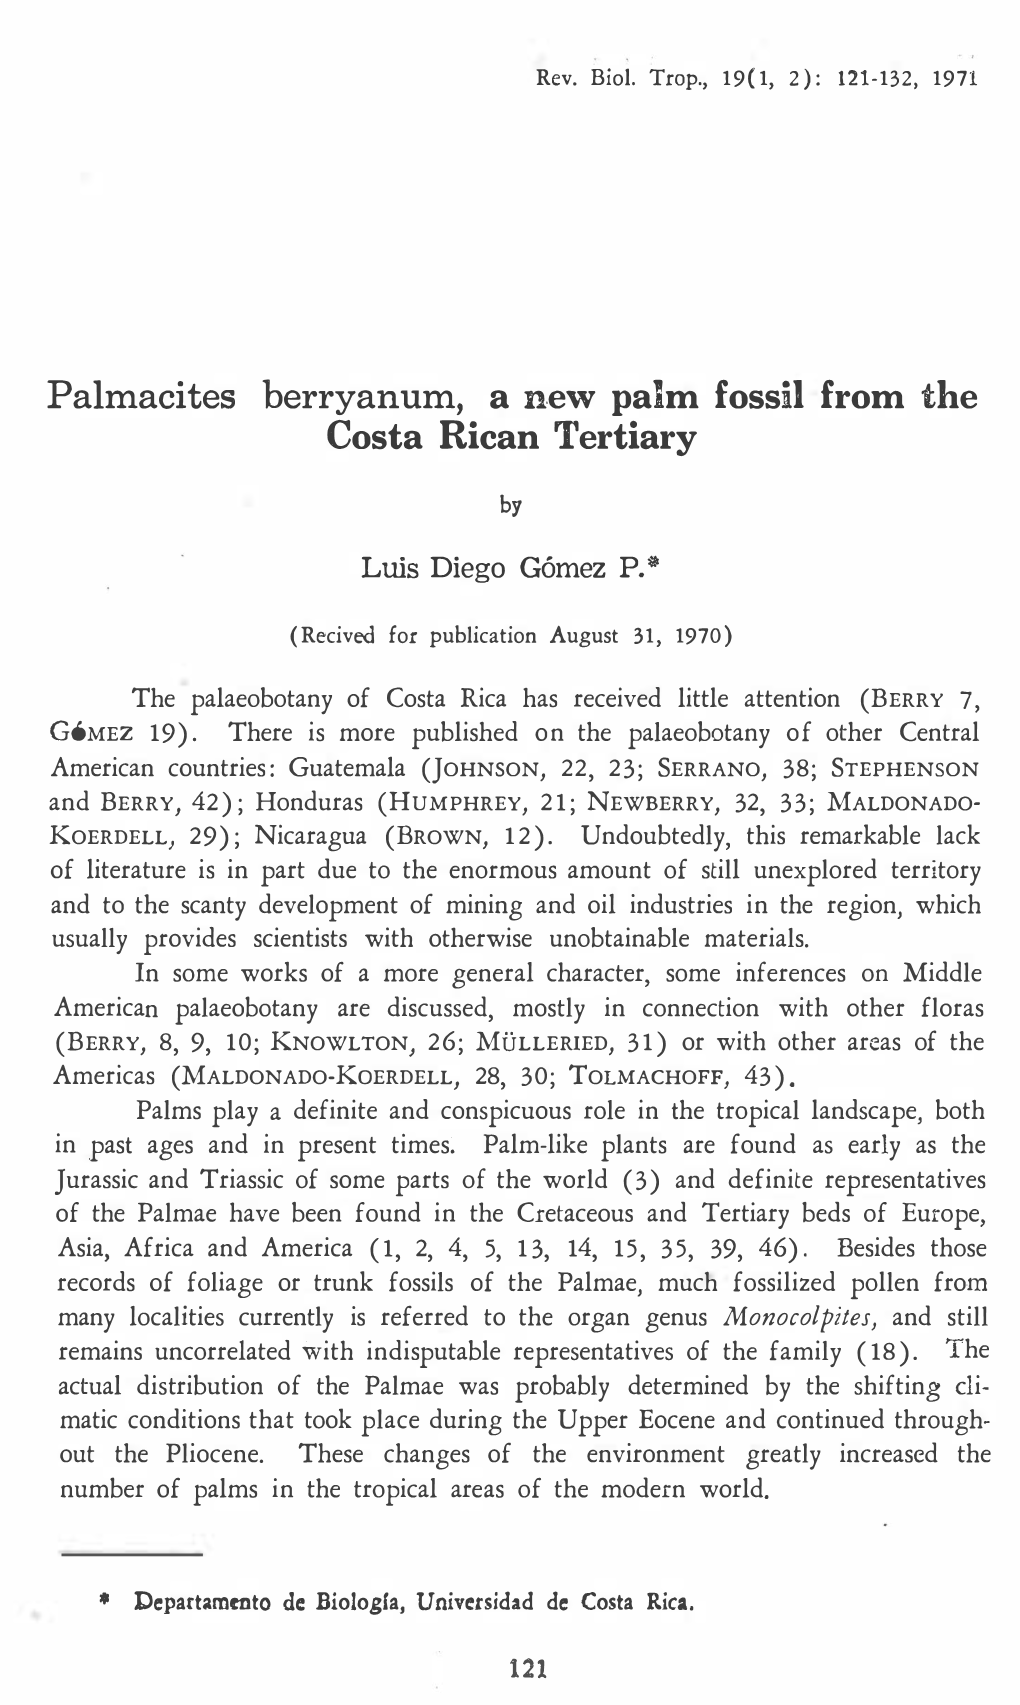 Palmacites Berryanum, a New Palm Fossil from the Costa Rican Tertiary